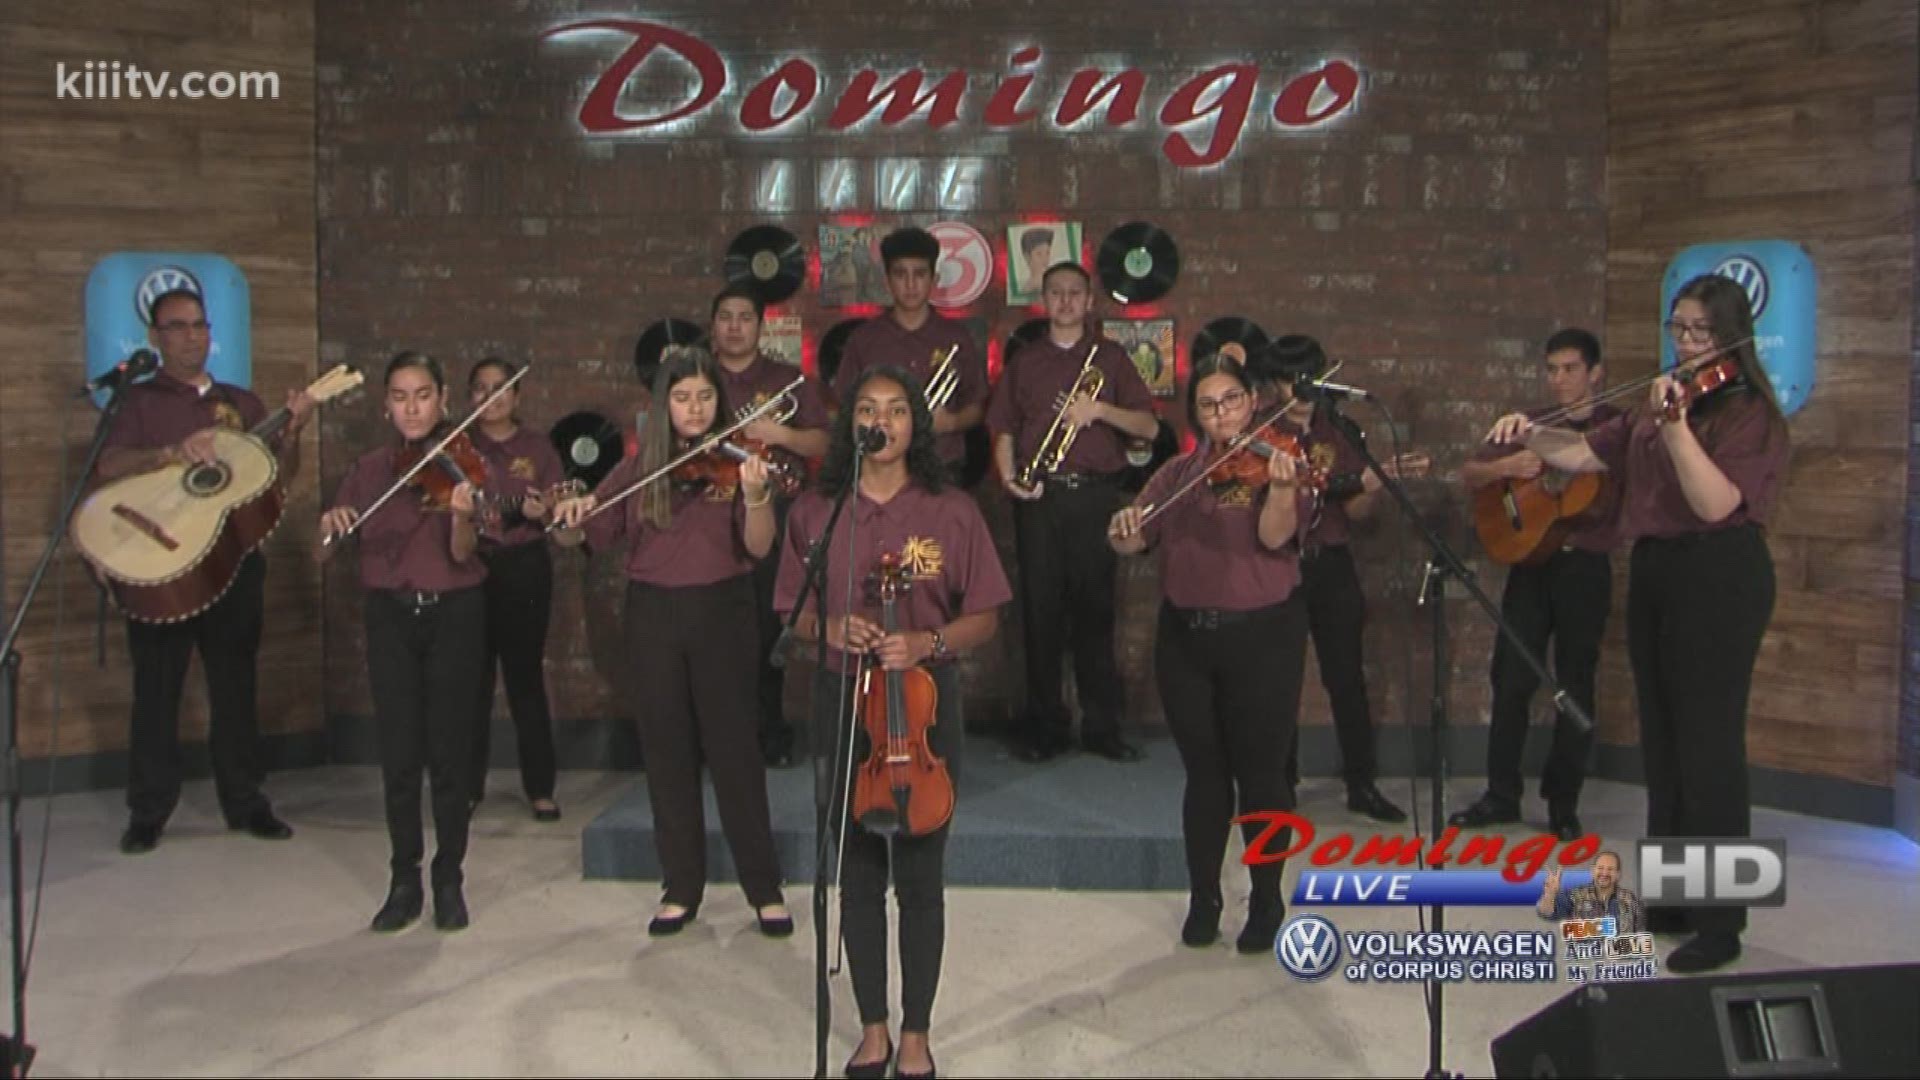 Tuloso Midway High School Mariachi performing "Viva Mexico" on Domingo Live.